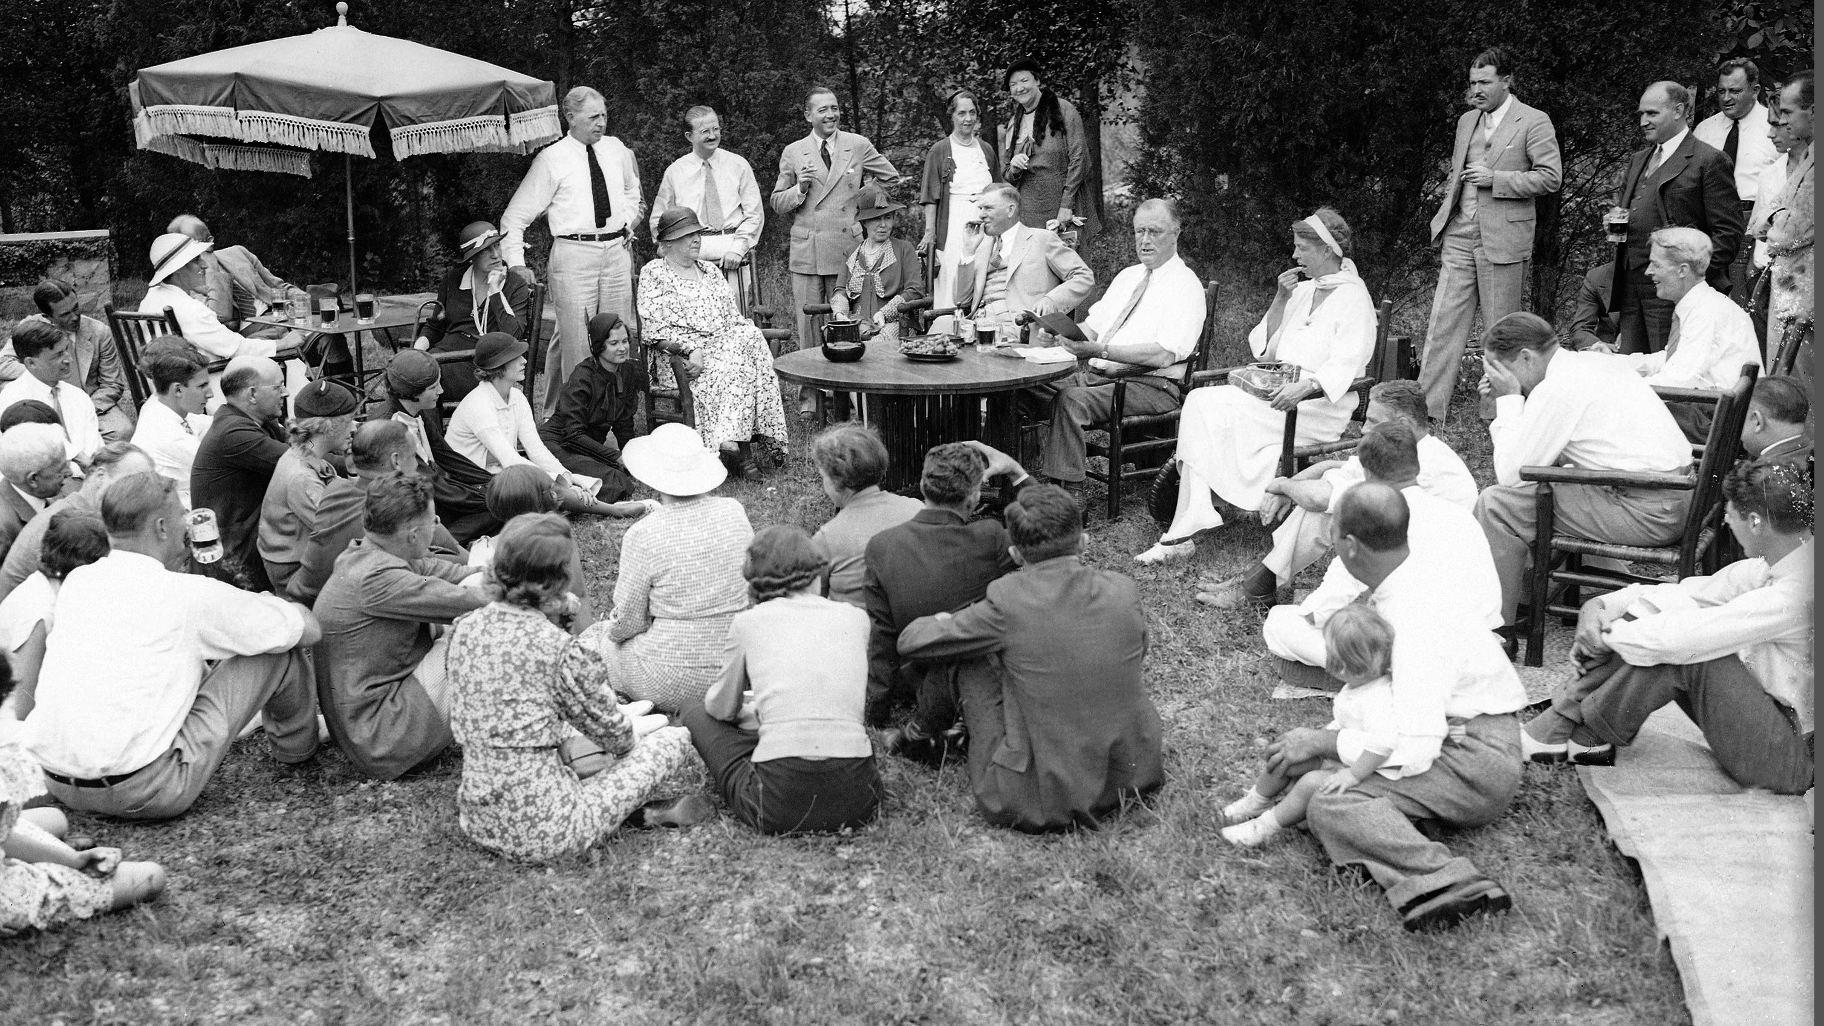 President Franklin Roosevelt reads to his guests as he and first lady Eleanor Roosevelt, at table, host a Labor Day picnic at their residence in Hyde Park, N.Y., Sept. 3, 1934. (AP Photo, File)